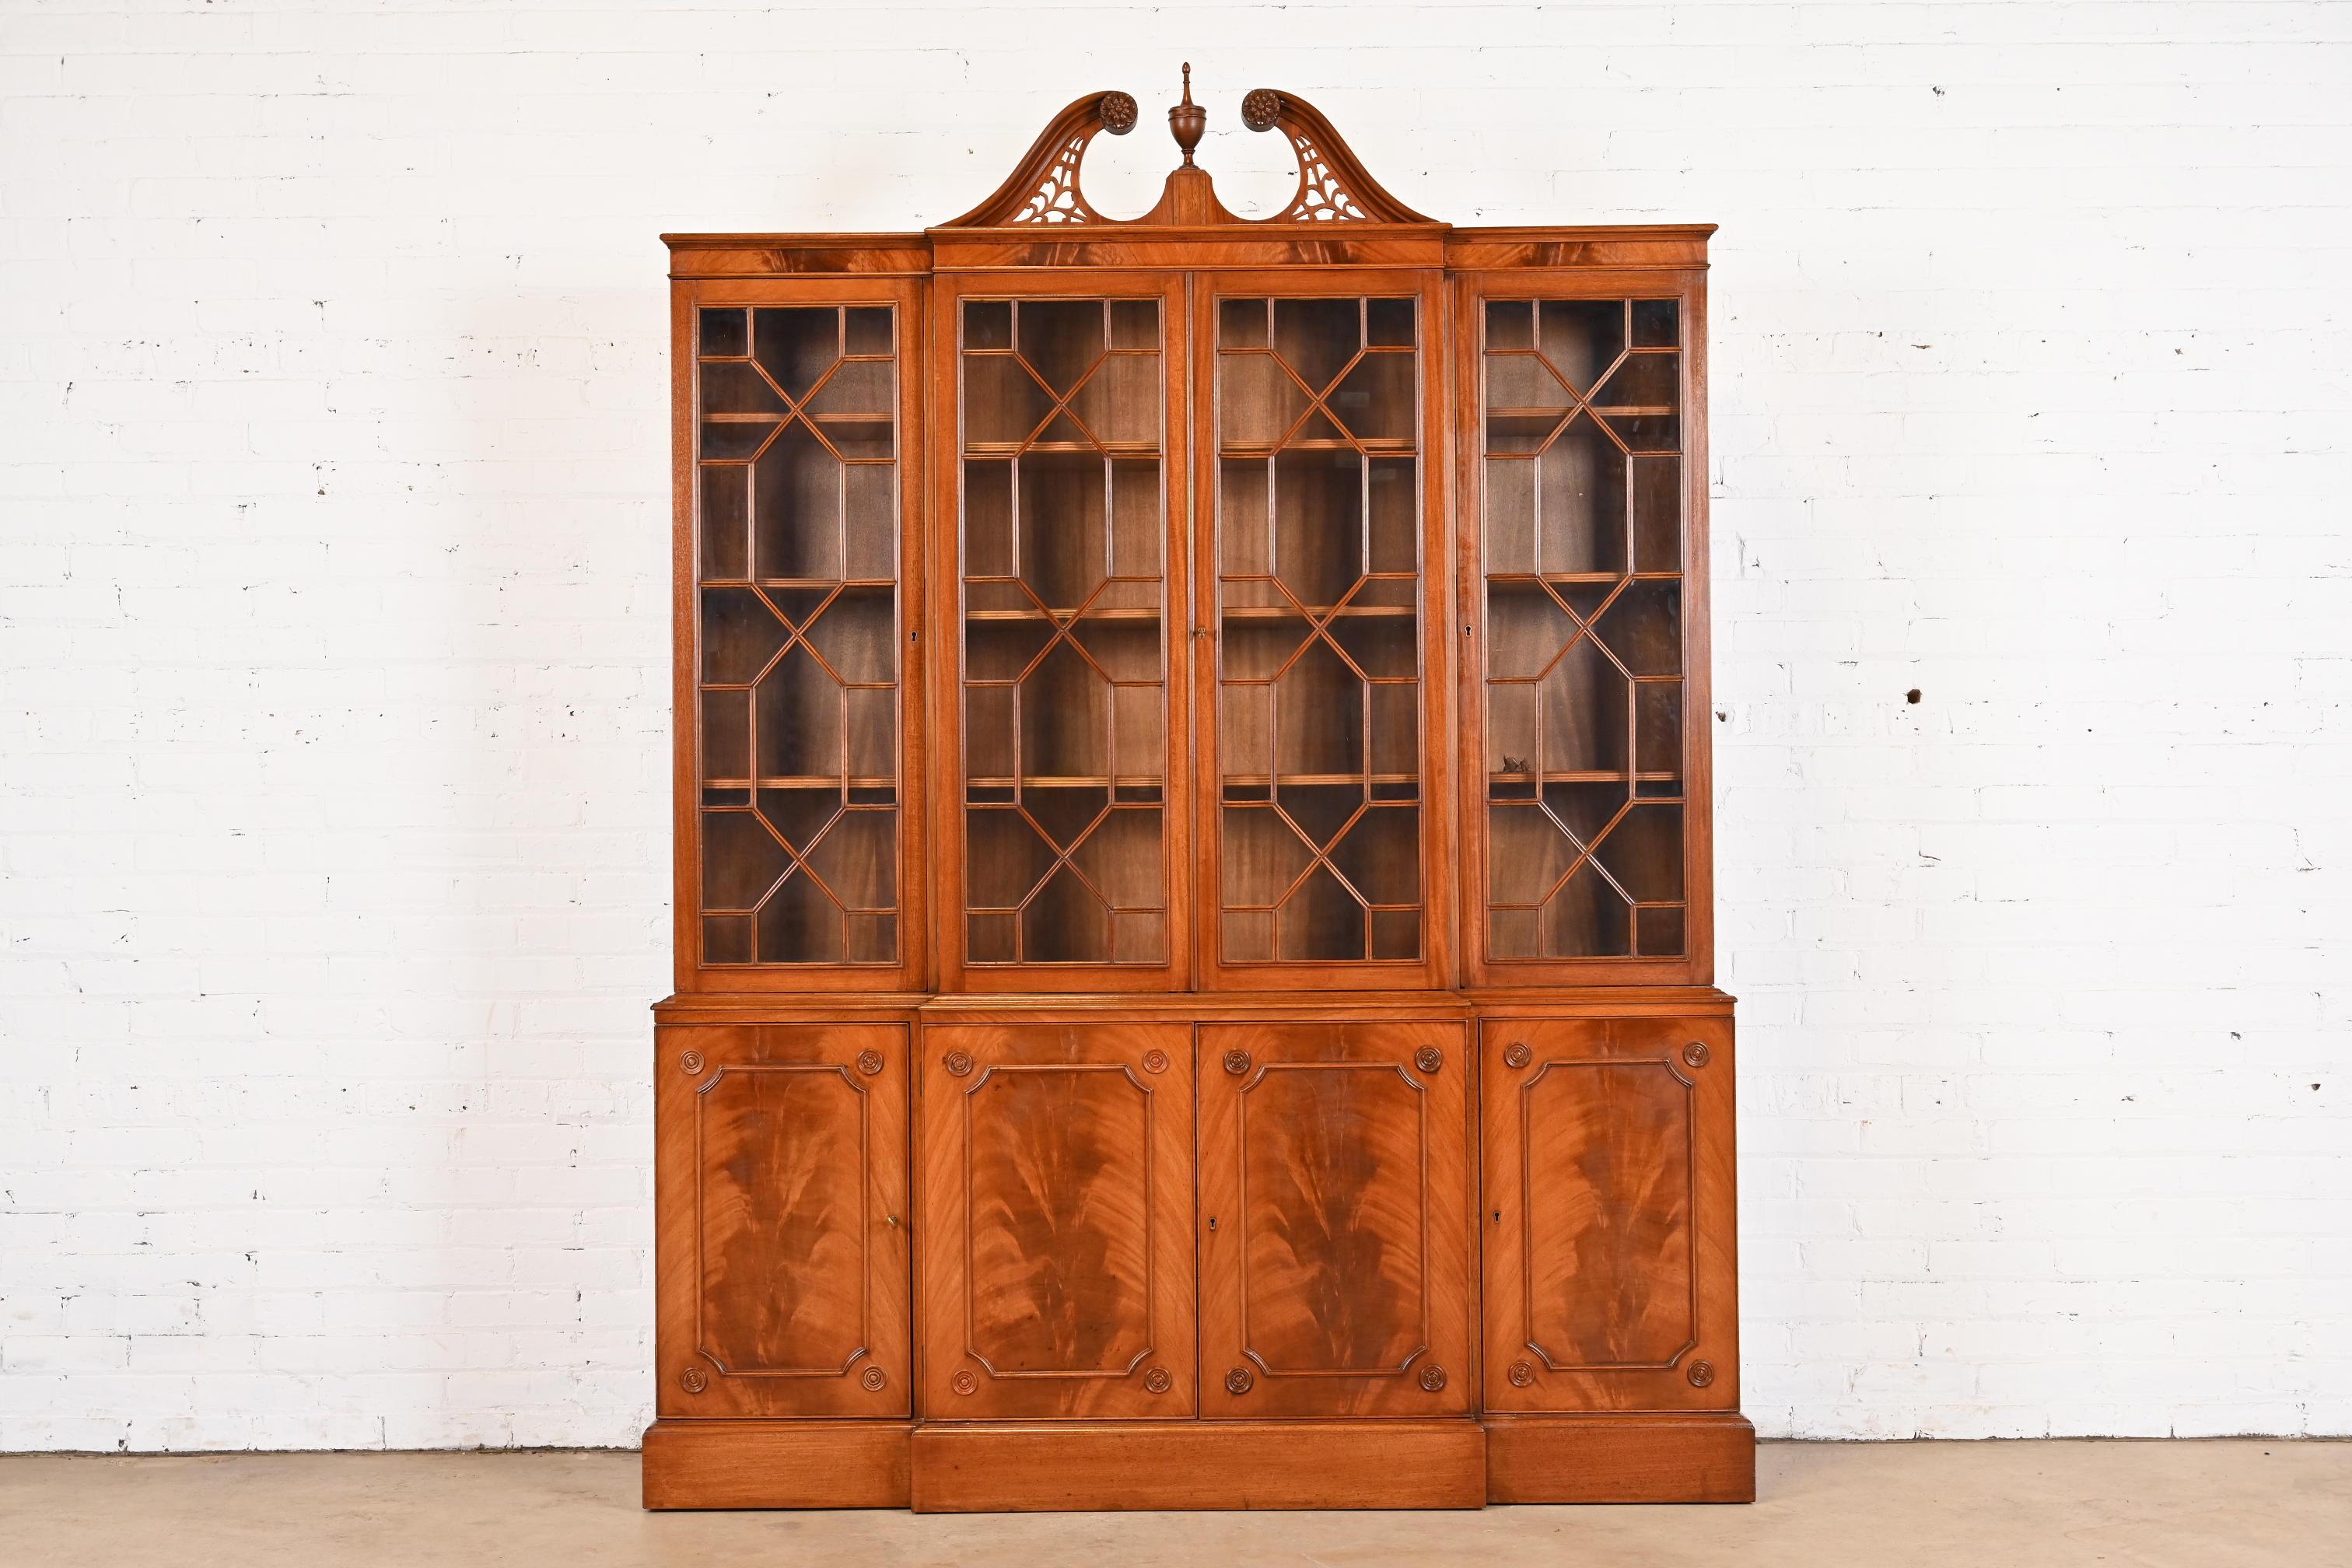 A gorgeous Georgian or Chippendale style breakfront bookcase or dining cabinet

In the manner of Baker Furniture

USA, Circa Mid-20th Century

Stunning book-matched flame mahogany, with mullioned glass front doors, and original brass hardware.